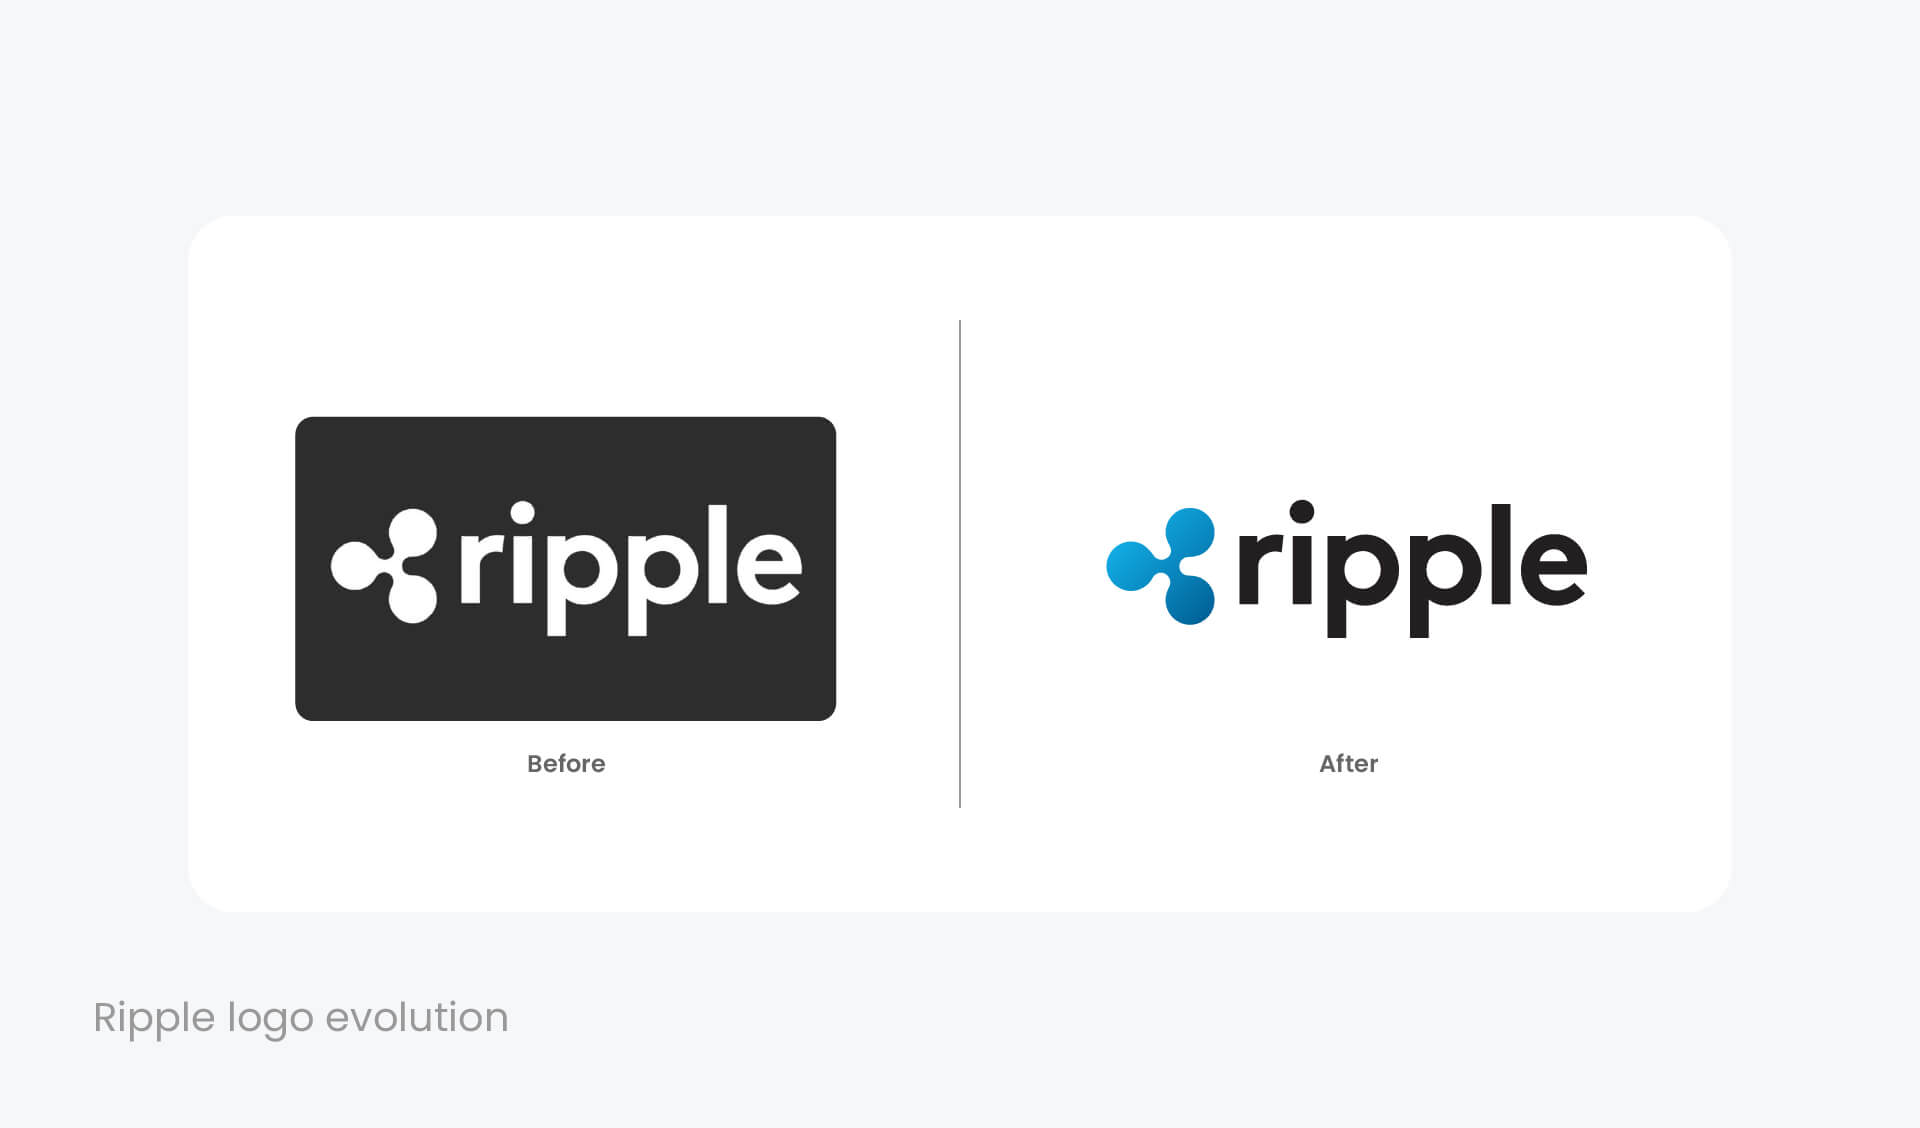 ripple logo - before and after